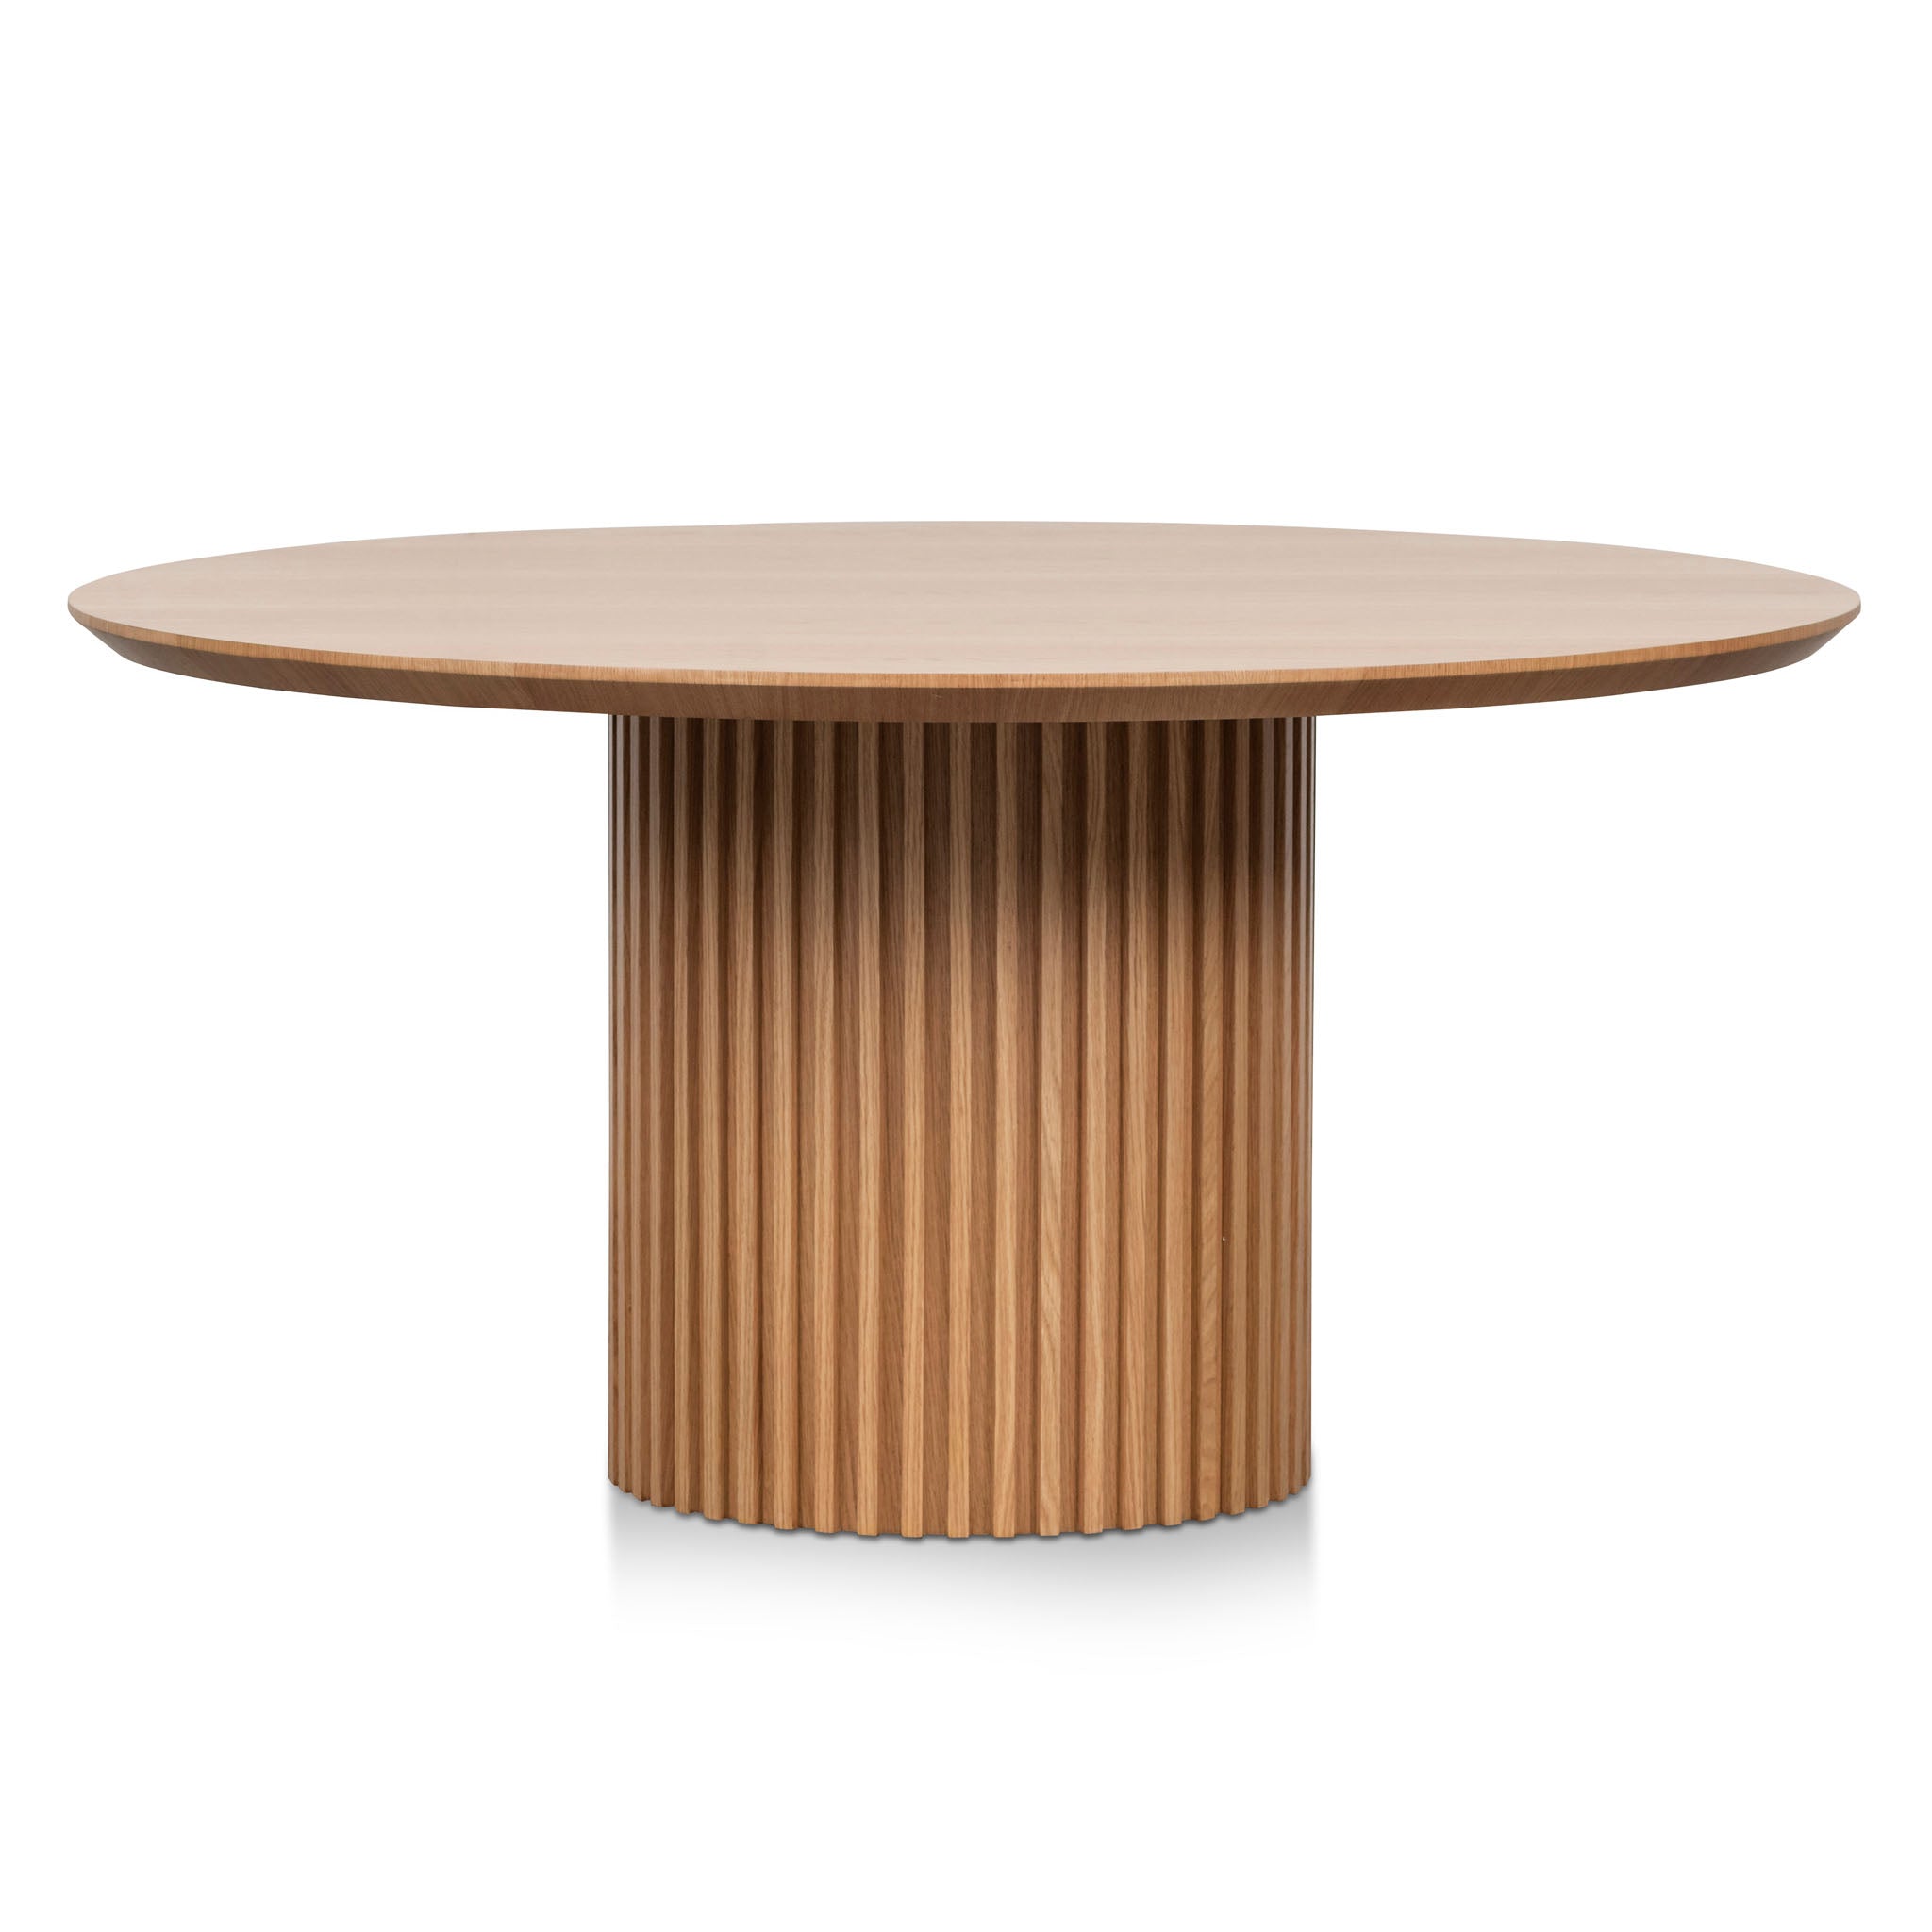 Vics 1.5m Wooden Round Dining Table - Natural - Dining Tables